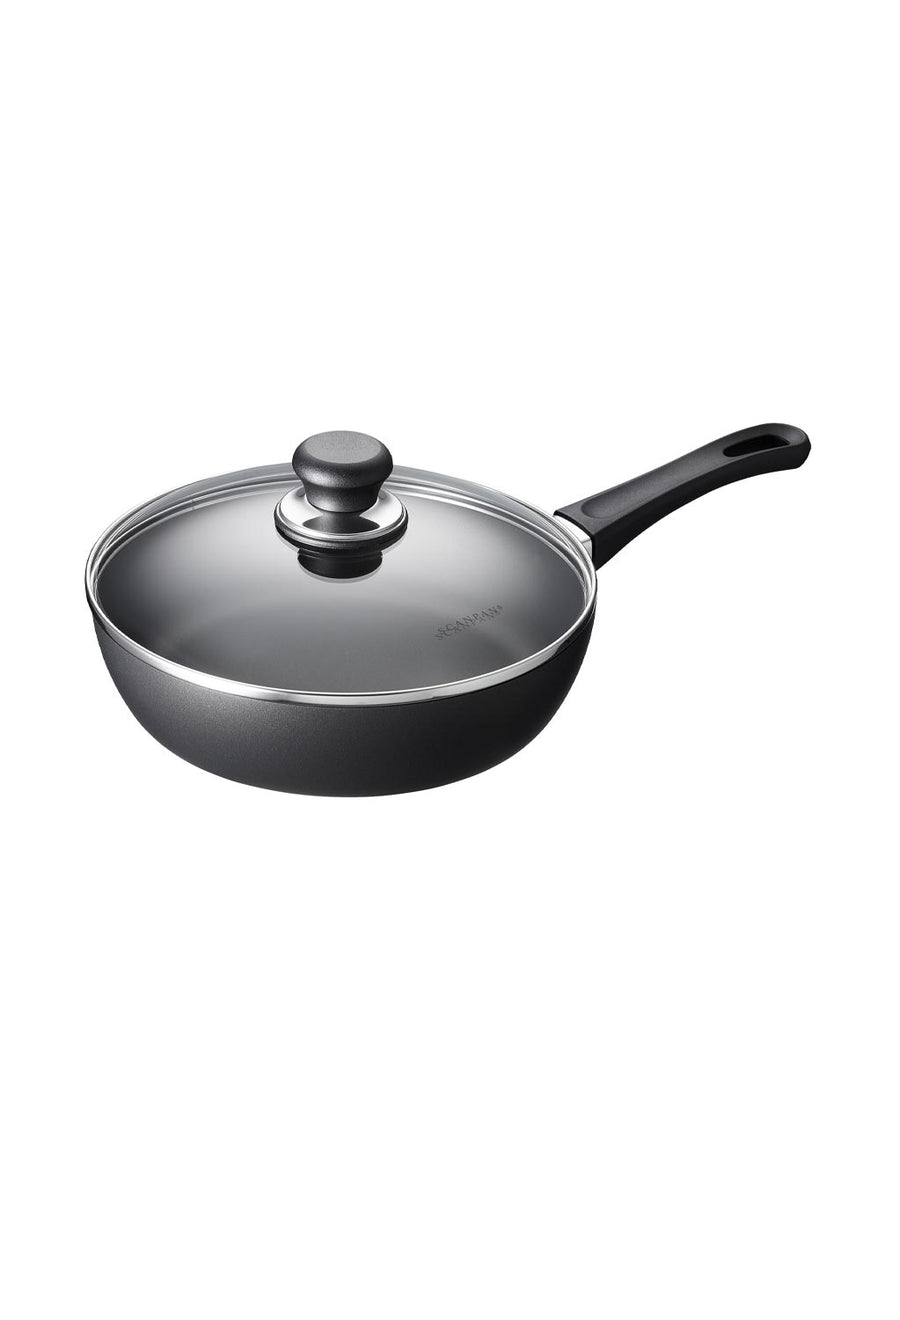 Scanpan Classic Induction Saute Pan with lid